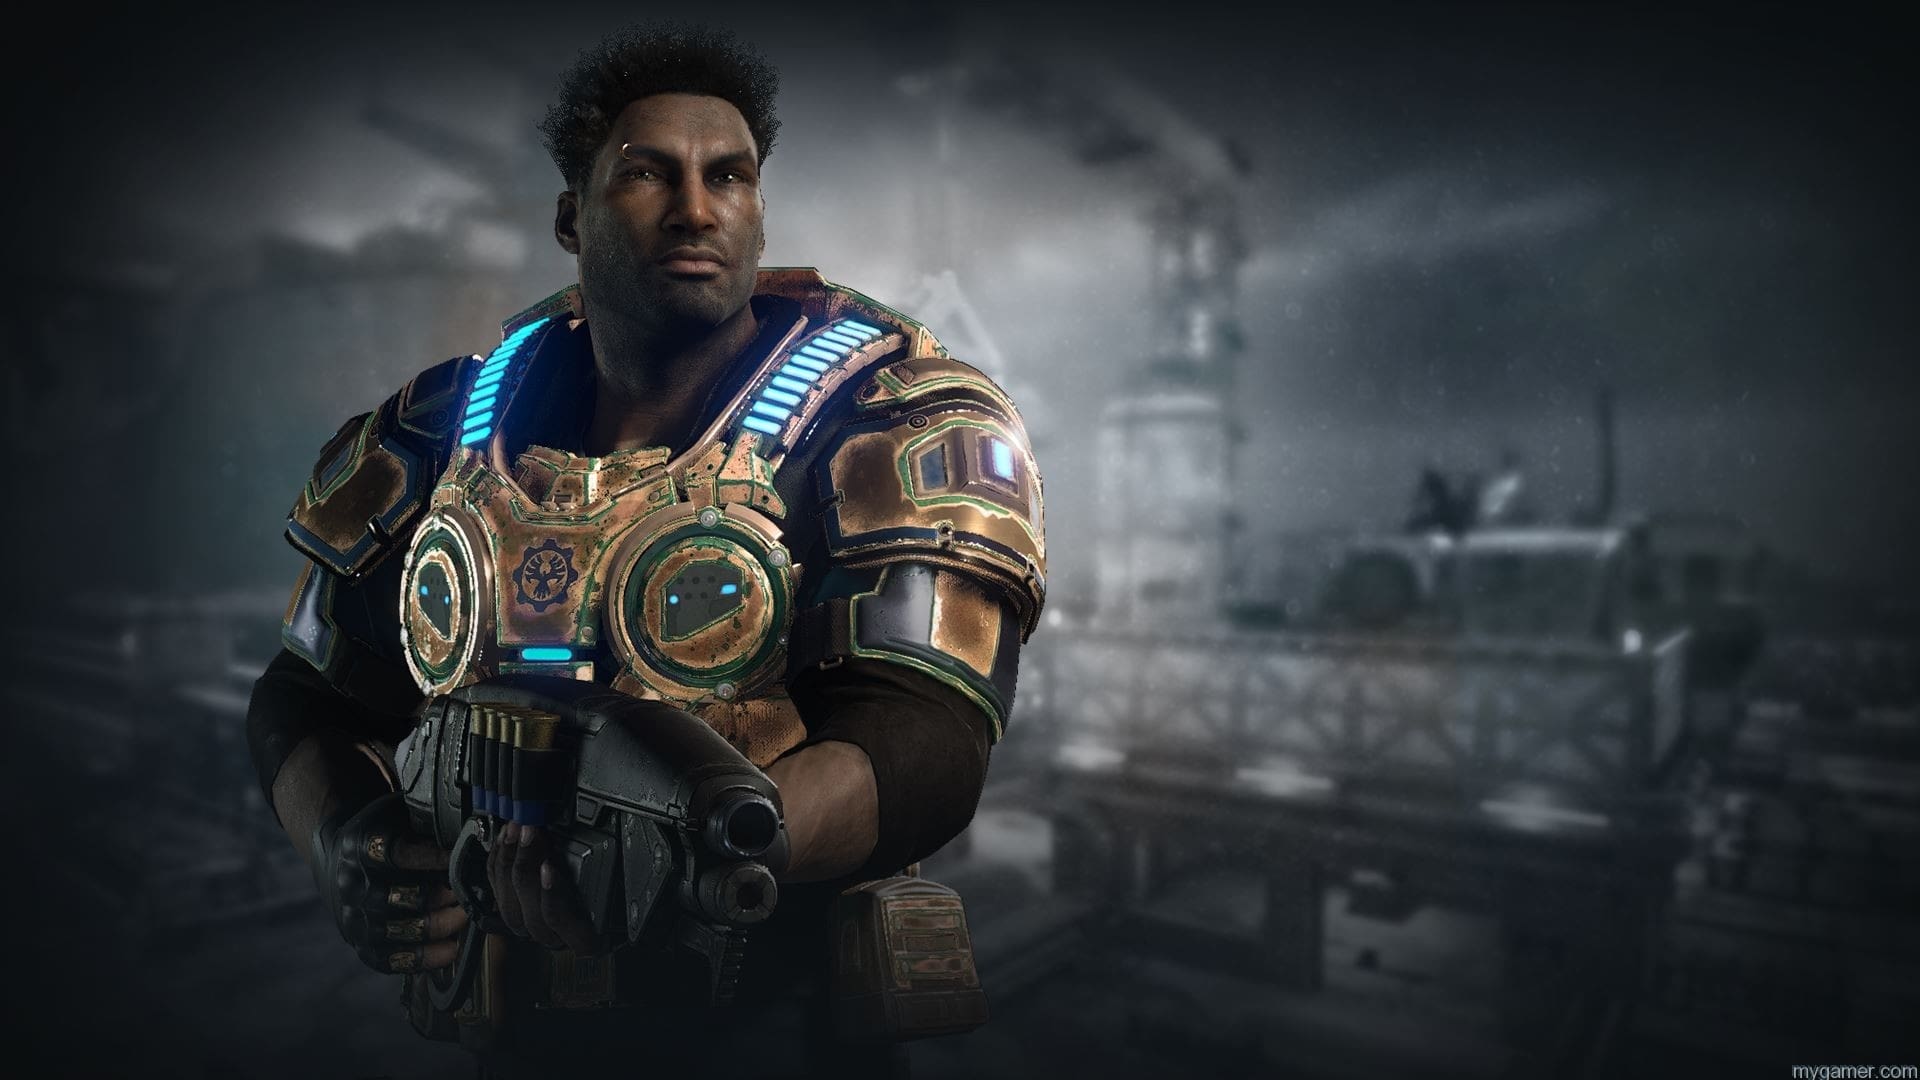 Del character from Gears of War 4